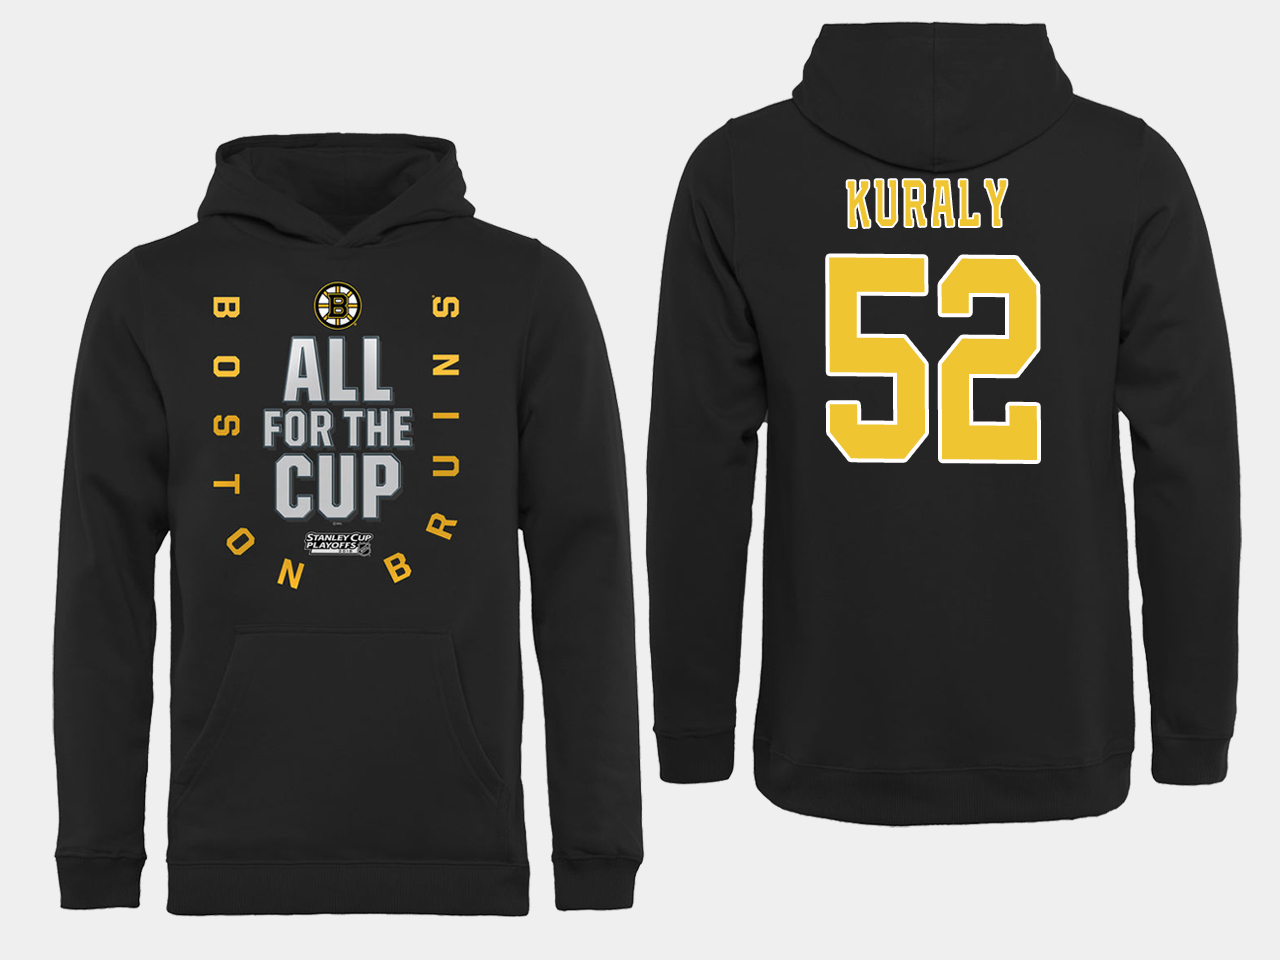 NHL Men Boston Bruins #52 Kuraly Black All for the Cup Hoodie